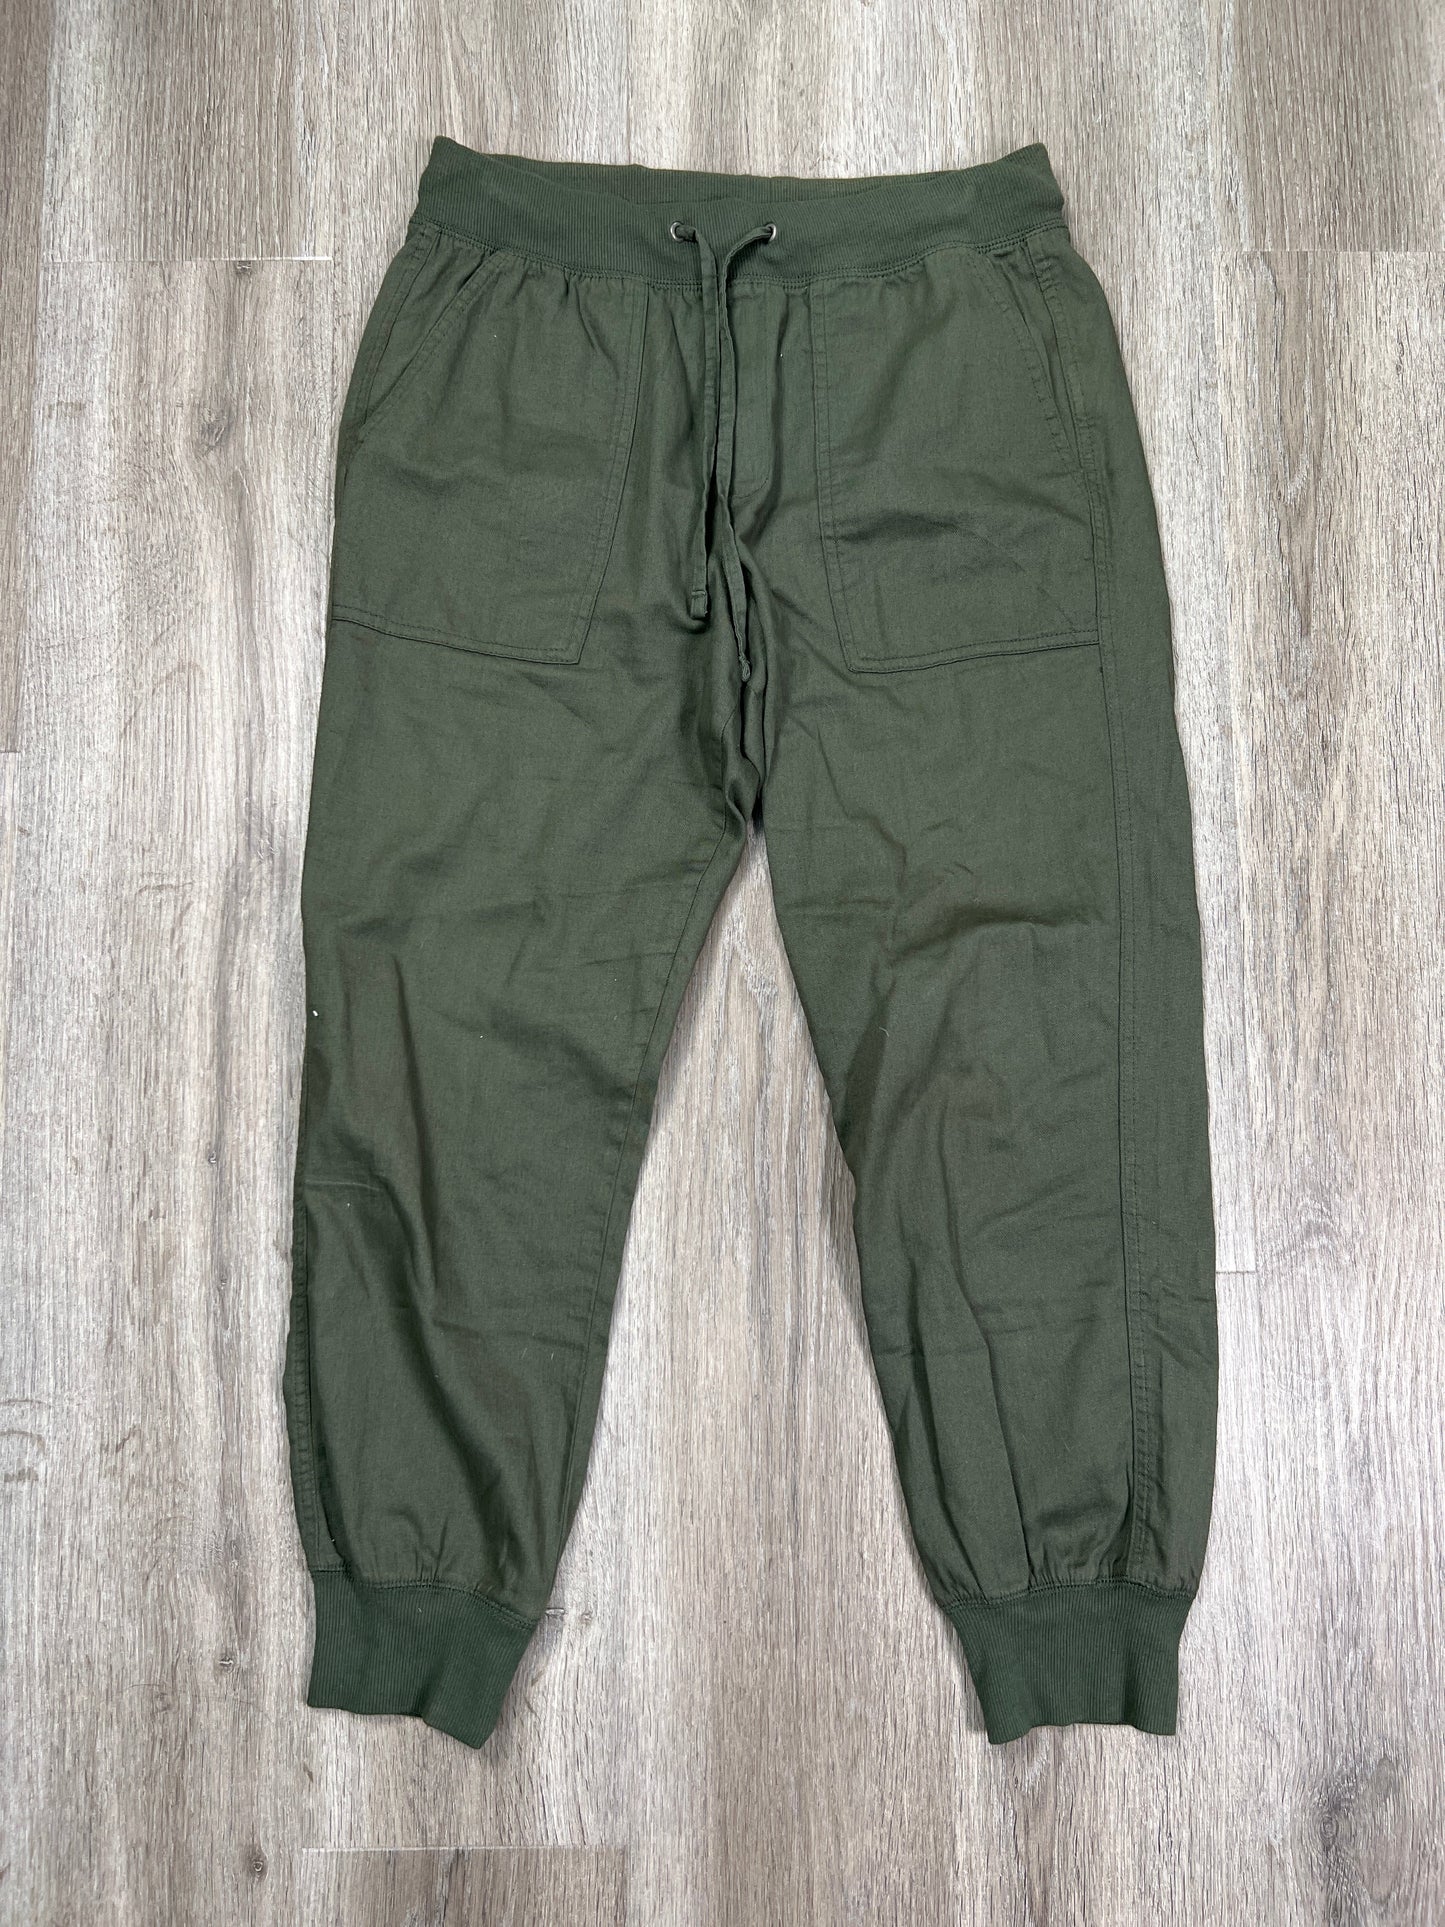 Pants Joggers By Gap  Size: S